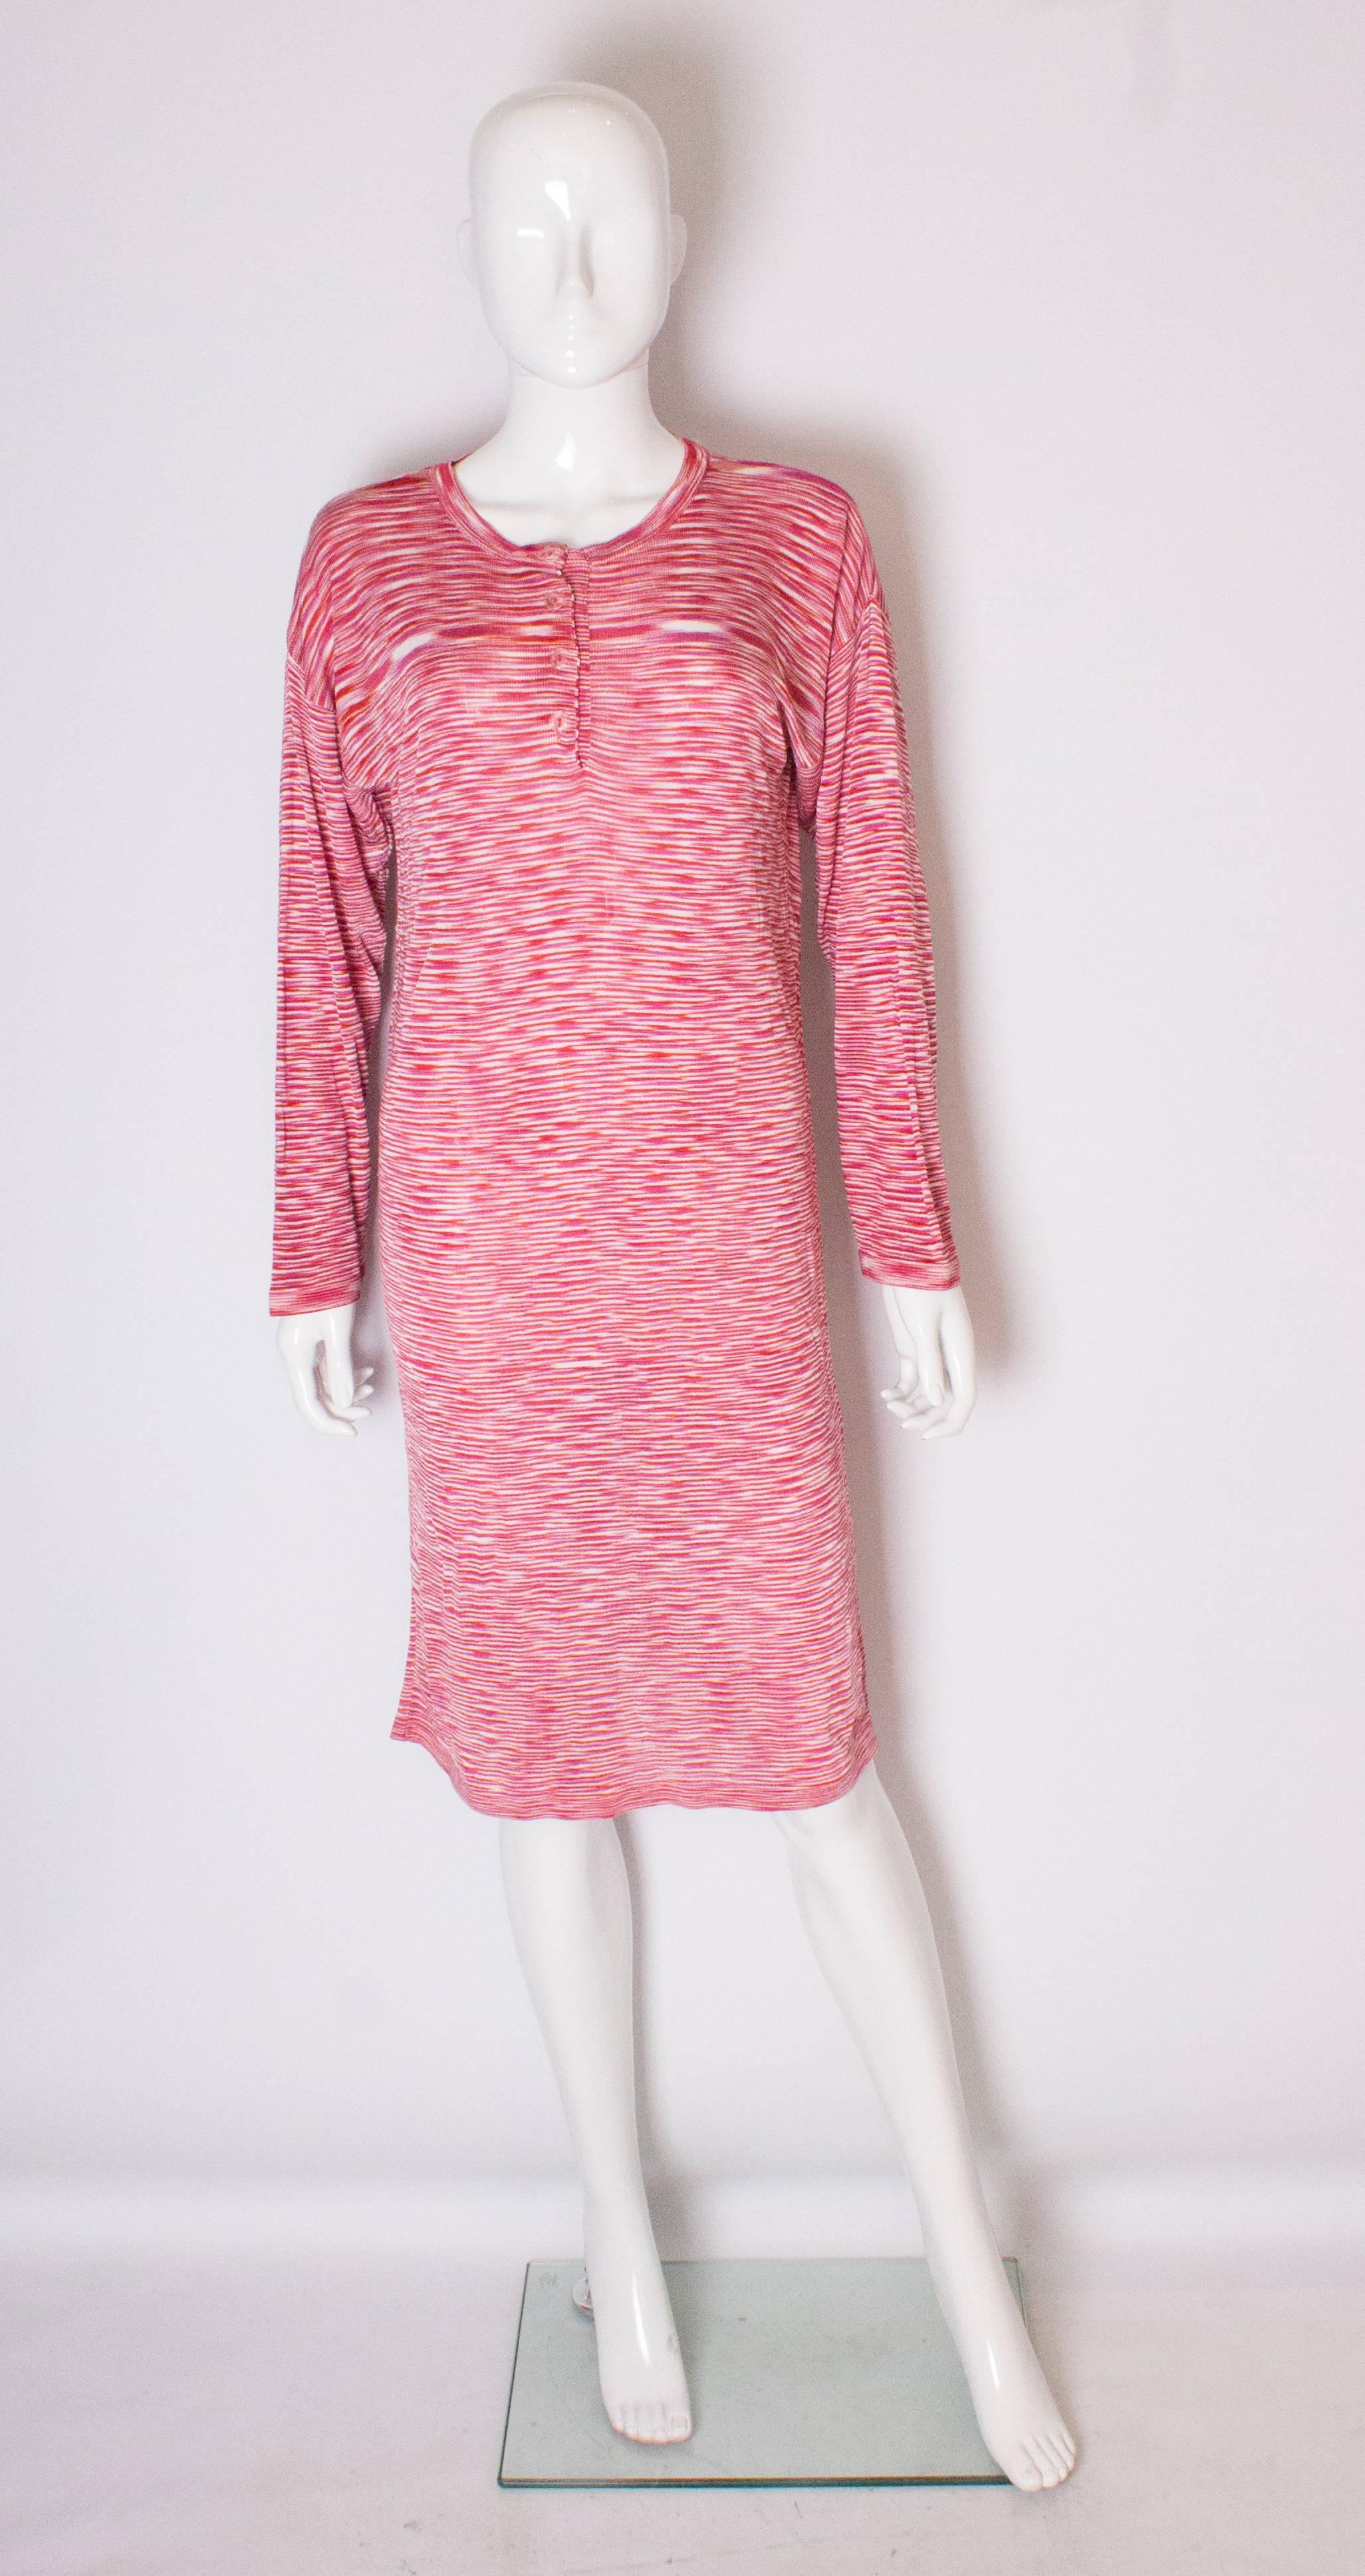 A chihc and easy to wear dress by Missoni.  The dress is in shades  of red and white. It has a round neckline with  a  four button opening.